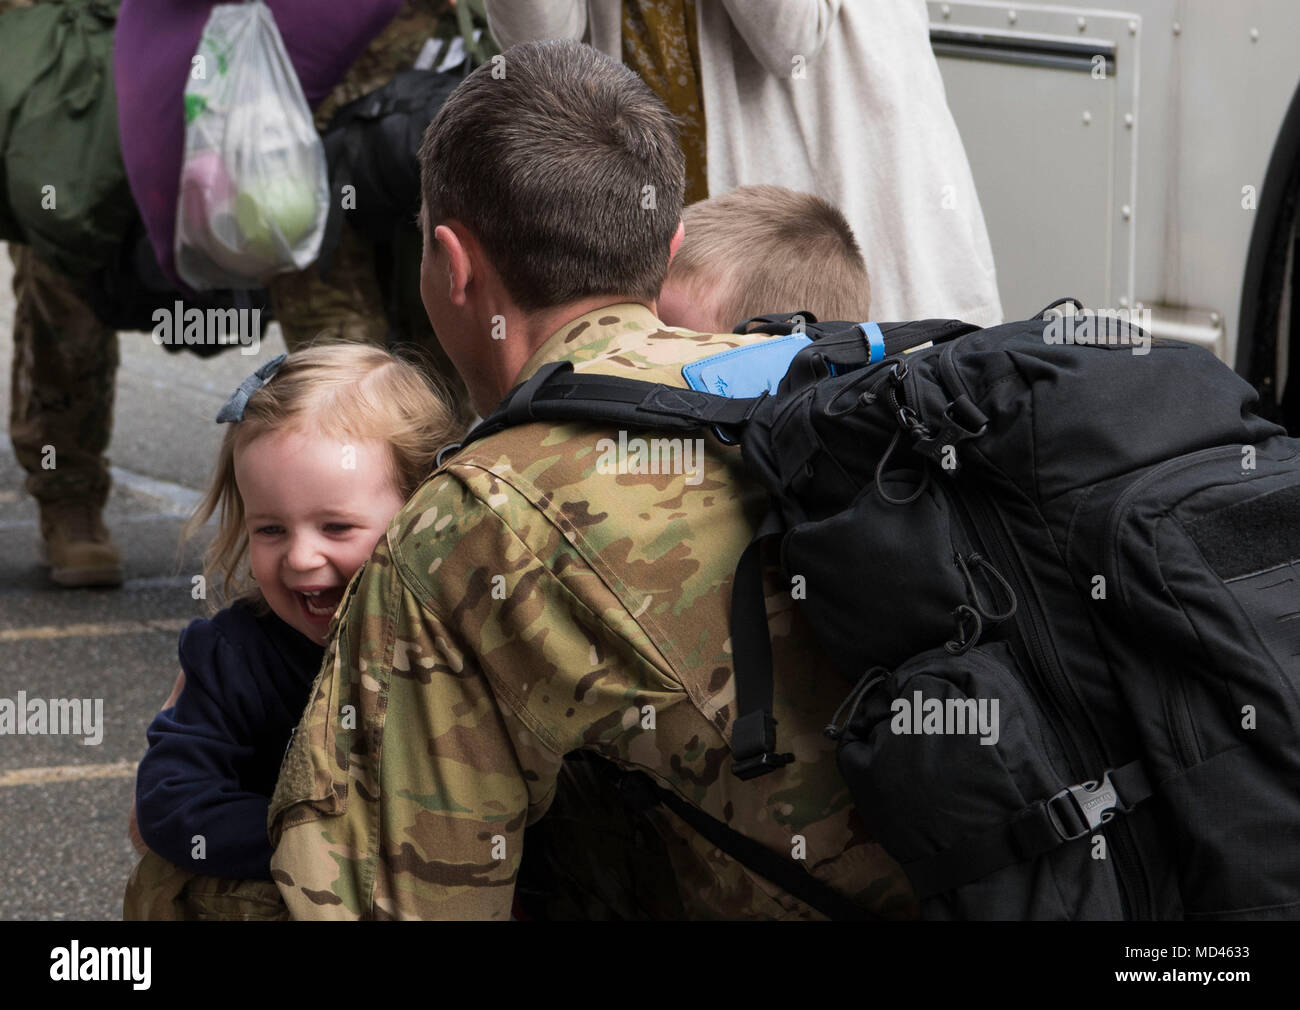 Capt. Andrew Lee, 7th Airlift Squadron C-17 Globemaster III pilot, hugs his children after returning home from a 90-day deployment in the Middle East at Joint Base Lewis-McChord, Wash., March 5, 2018. As a pilot, Lee was a part of the 816th Expeditionary Airlift Squadron at Al Udeid Air Base, Qatar, and flew a C-17 to deliver mission critical cargo and supplies within the area of responsibility. (U.S. Air Force photo by Senior Airman Tryphena Mayhugh) Stock Photo